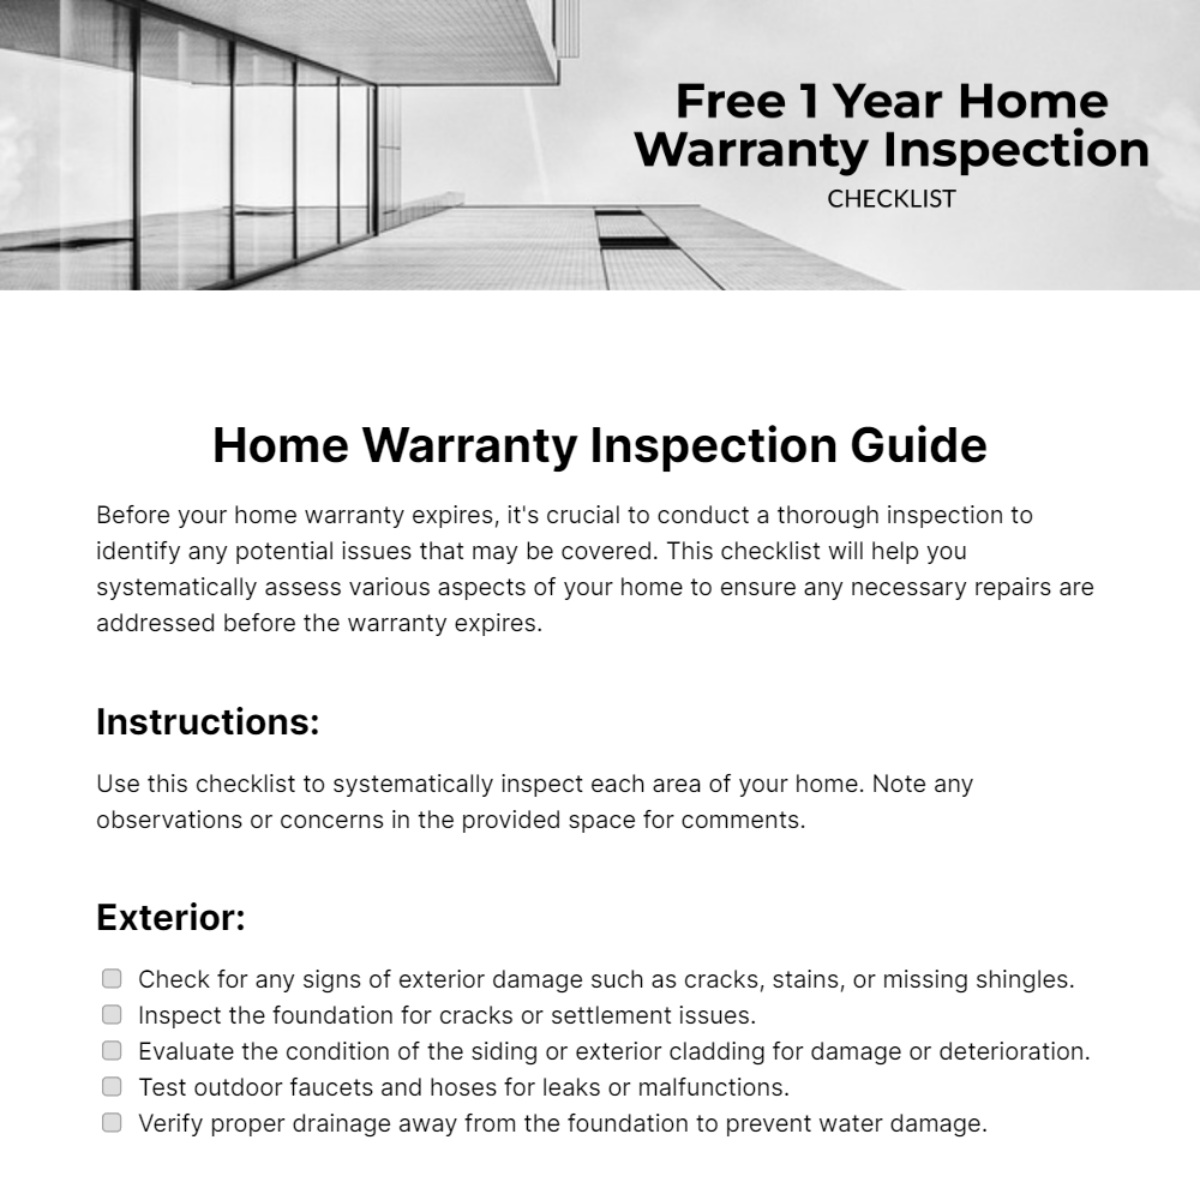 1 Year Home Warranty Inspection Checklist Template